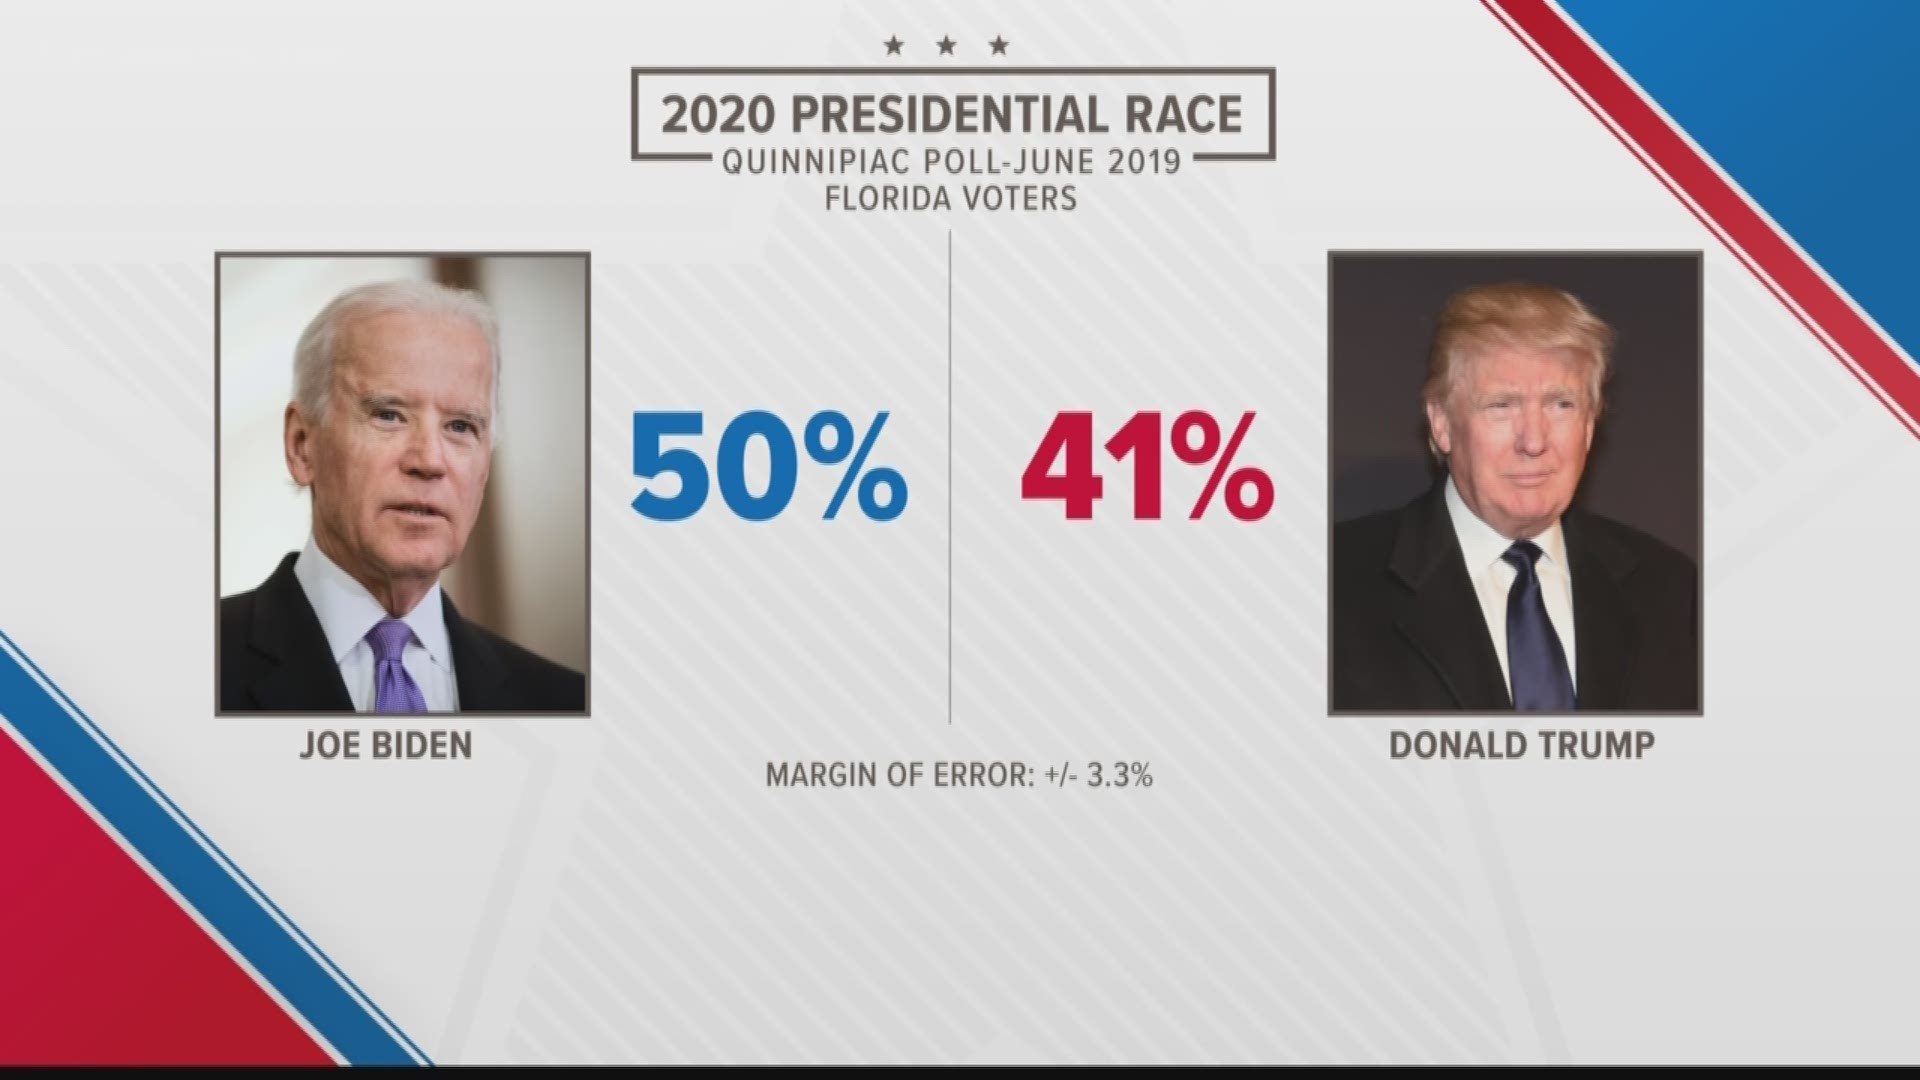 An early look into the 2020 presidential race shows that President Donald Trump is trailing behind former Vice President Joe Biden and Vermont Sen. Bernie Sanders in Florida, according to a new Quinnipiac University Poll.